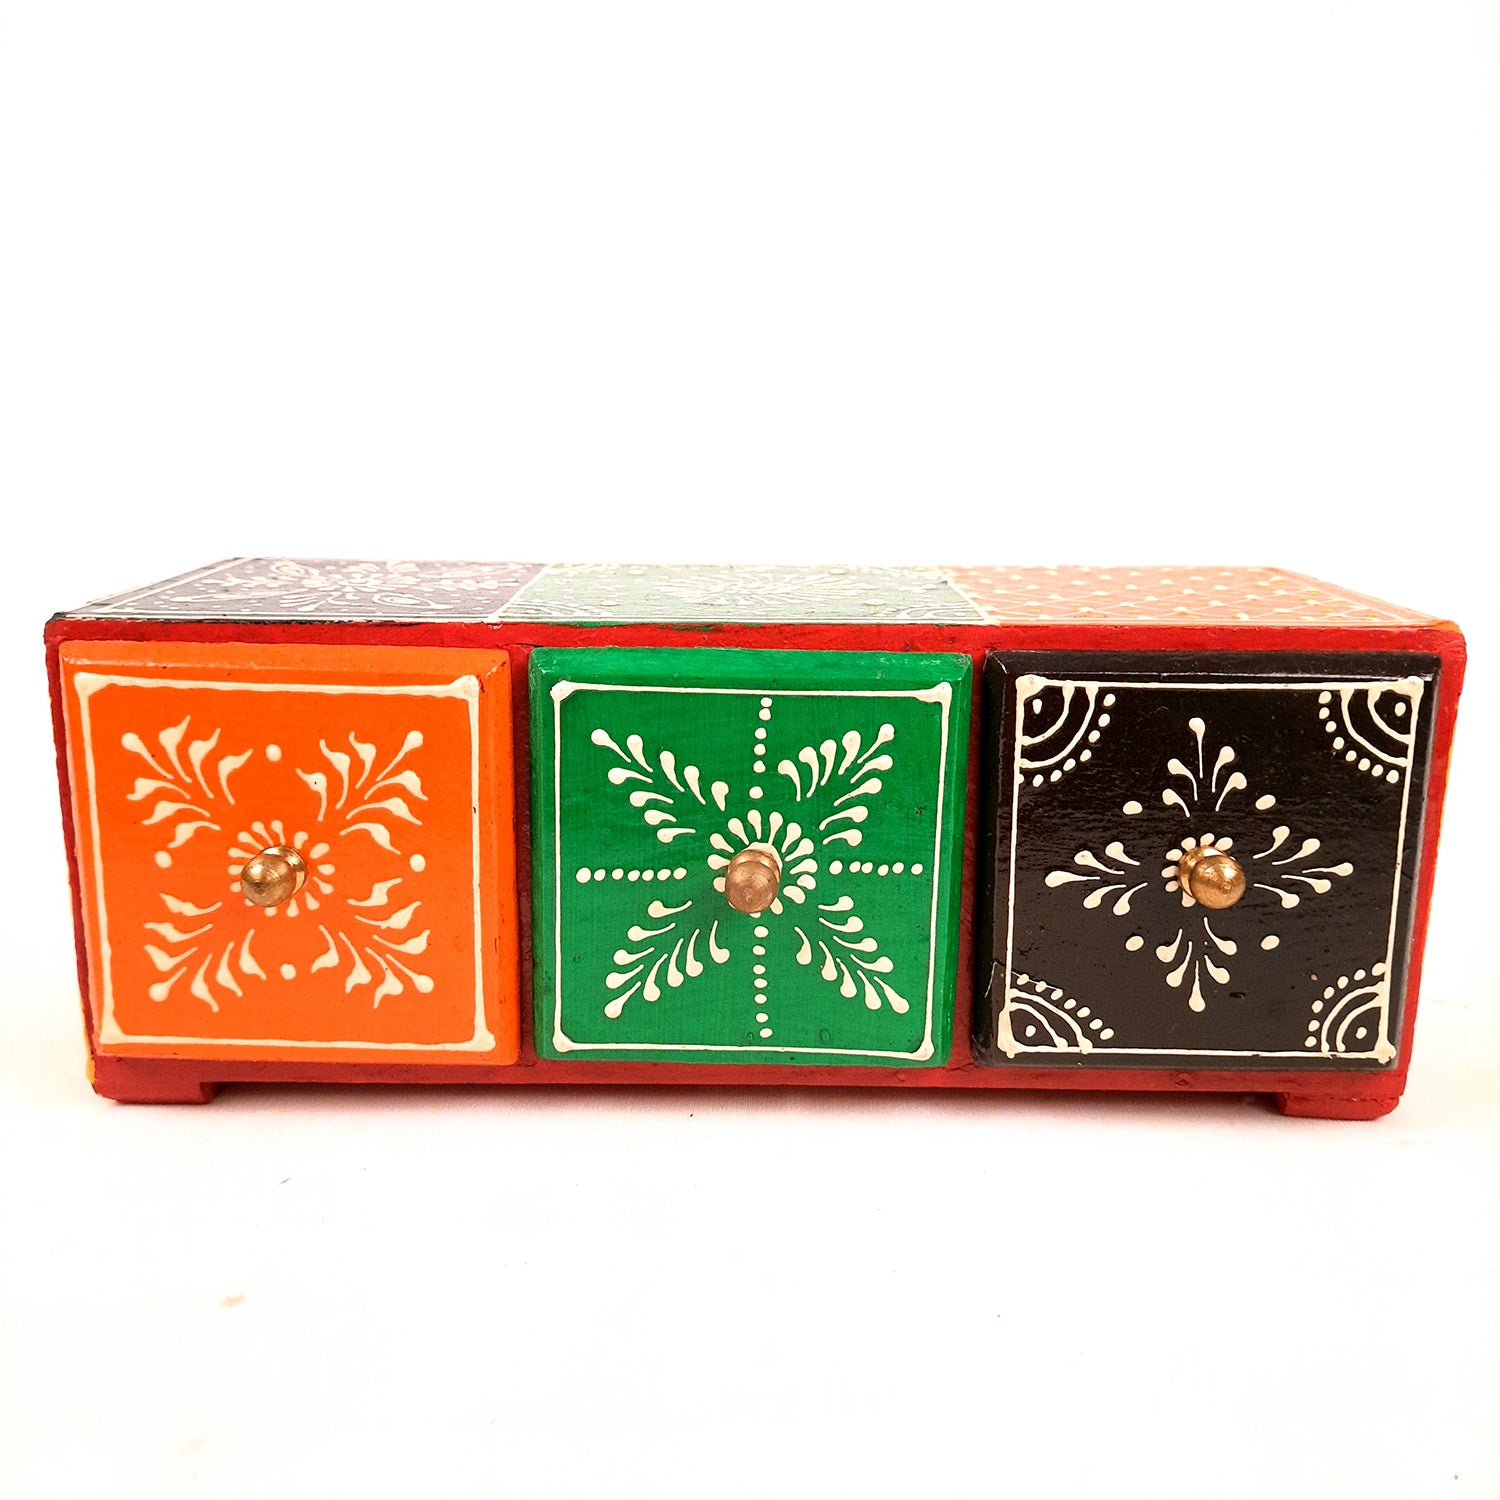 Jewellery Box | Decorative Wooden Jewelry Box - For Earring, Necklace & Gifts - 4 Inch - Apkamart